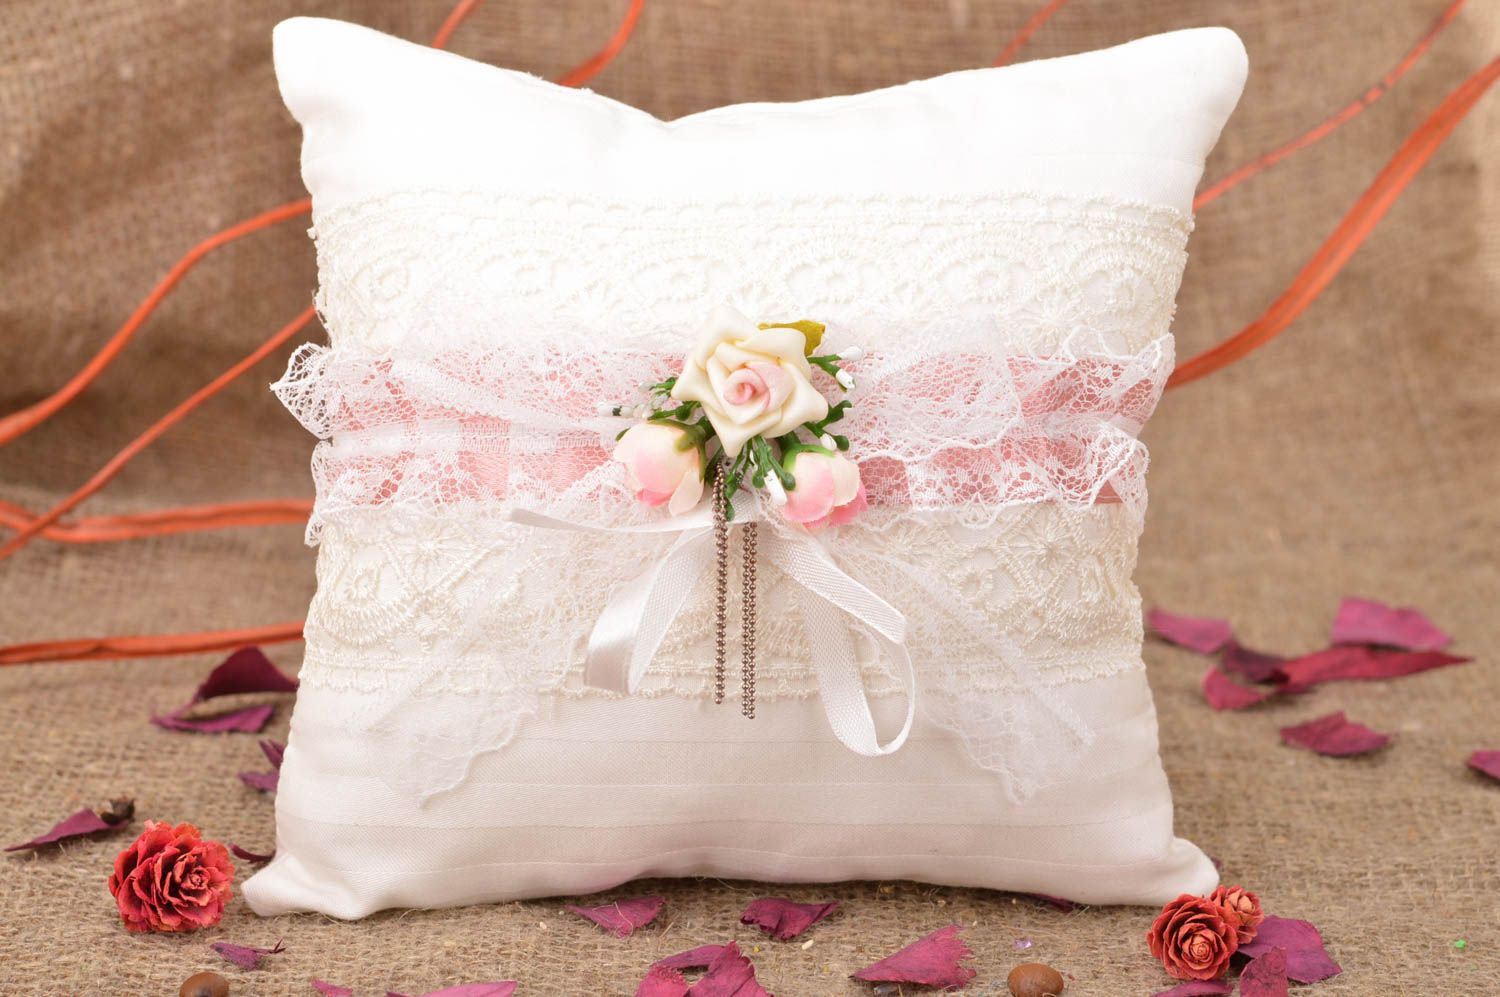 Handmade tender white wedding ring pillow with lace designer accessory photo 1